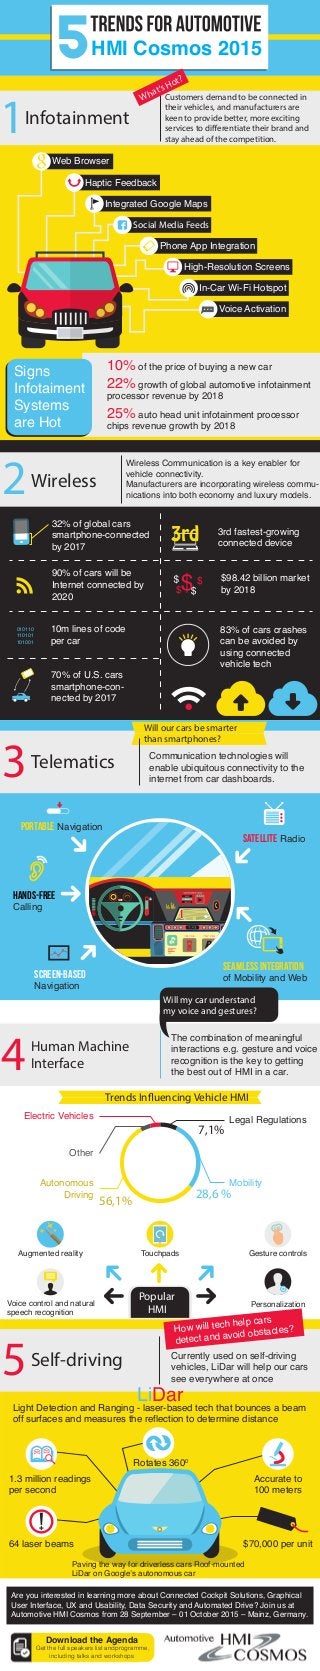 Wireless
Telematics
Infotainment
Web Browser
Haptic Feedback
Integrated Google Maps
Social Media Feeds
Phone App Integration
High-Resolution Screens
In-Car Wi-Fi Hotspot
Voice Activation
10% of the price of buying a new car
25% auto head unit infotainment processor
chips revenue growth by 2018
22% growth of global automotive infotainment
processor revenue by 2018
Popular
HMI
Touchpads
Voice control and natural
speech recognition
Gesture controlsAugmented reality
Personalization
Light Detection and Ranging - laser-based tech that bounces a beam
off surfaces and measures the reflection to determine distance
LiDar
64 laser beams
1.3 million readings
per second
Accurate to
100 meters
$70,000 per unit
Rotates 3600
Portable Navigation
Satellite Radio
Hands-Free
Calling
Seamless Integration
of Mobility and WebScreen-Based
Navigation
1
2
3
4
5
Customers demand to be connected in
their vehicles, and manufacturers are
keen to provide better, more exciting
services to differentiate their brand and
stay ahead of the competition.
Wireless Communication is a key enabler for
vehicle connectivity.
Manufacturers are incorporating wireless commu-
nications into both economy and luxury models.
Communication technologies will
enable ubiquitous connectivity to the
internet from car dashboards.
The combination of meaningful
interactions e.g. gesture and voice
recognition is the key to getting
the best out of HMI in a car.
Currently used on self-driving
vehicles, LiDar will help our cars
see everywhere at once
What’s Hot?
Signs
Infotaiment
Systems
are Hot
32% of global cars
smartphone-connected
by 2017
3rd fastest-growing
connected device
$98.42 billion market
by 2018
83% of cars crashes
can be avoided by
using connected
vehicle tech
90% of cars will be
Internet connected by
2020
10m lines of code
per car
010110
110101
101001
70% of U.S. cars
smartphone-con-
nected by 2017
Will our cars be smarter
than smartphones?
Human Machine
Interface
Self-driving
Will my car understand
my voice and gestures?
Autonomous
Driving
Mobility
Legal RegulationsElectric Vehicles
Other
56,1%
28,6 %
7,1%
Trends Influencing Vehicle HMI
How will tech help cars
detect and avoid obstacles?
Paving the way for driverless cars Roof-mounted
LiDar on Google’s autonomous car
Are you interested in learning more about Connected Cockpit Solutions, Graphical
User Interface, UX and Usability, Data Security and Automated Drive? Join us at
Automotive HMI Cosmos from 28 September – 01 October 2015 – Mainz, Germany.
HMI Cosmos 2015
Download the Agenda
Get the full speakers list andprogramme,
including talks and workshops
 